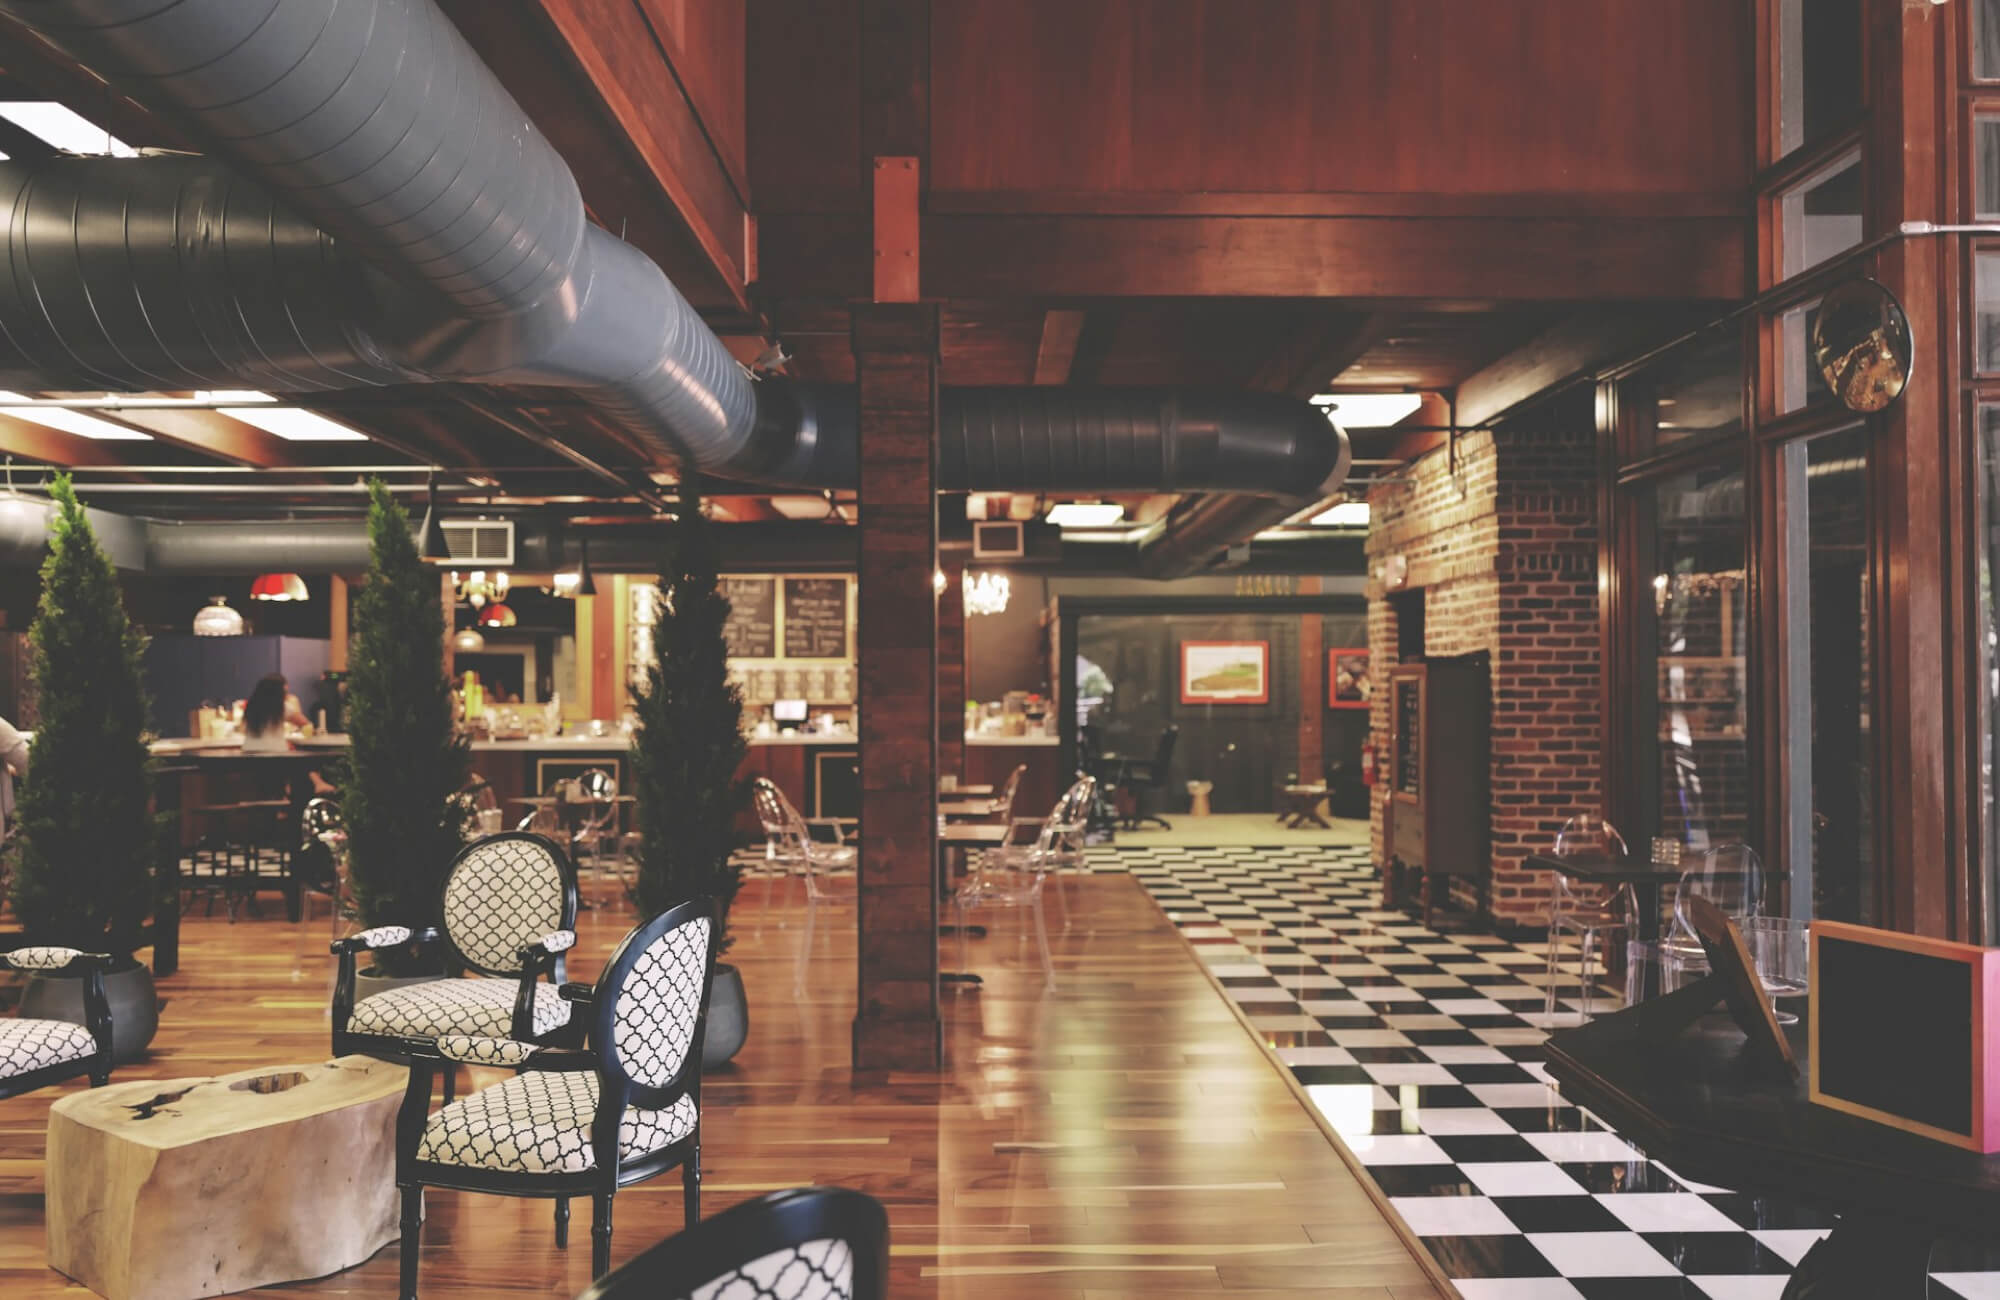 A cozy cafe featuring a mix of wooden flooring and a classic black and white checkerboard tile pattern, with stylish seating and a warm, inviting ambiance